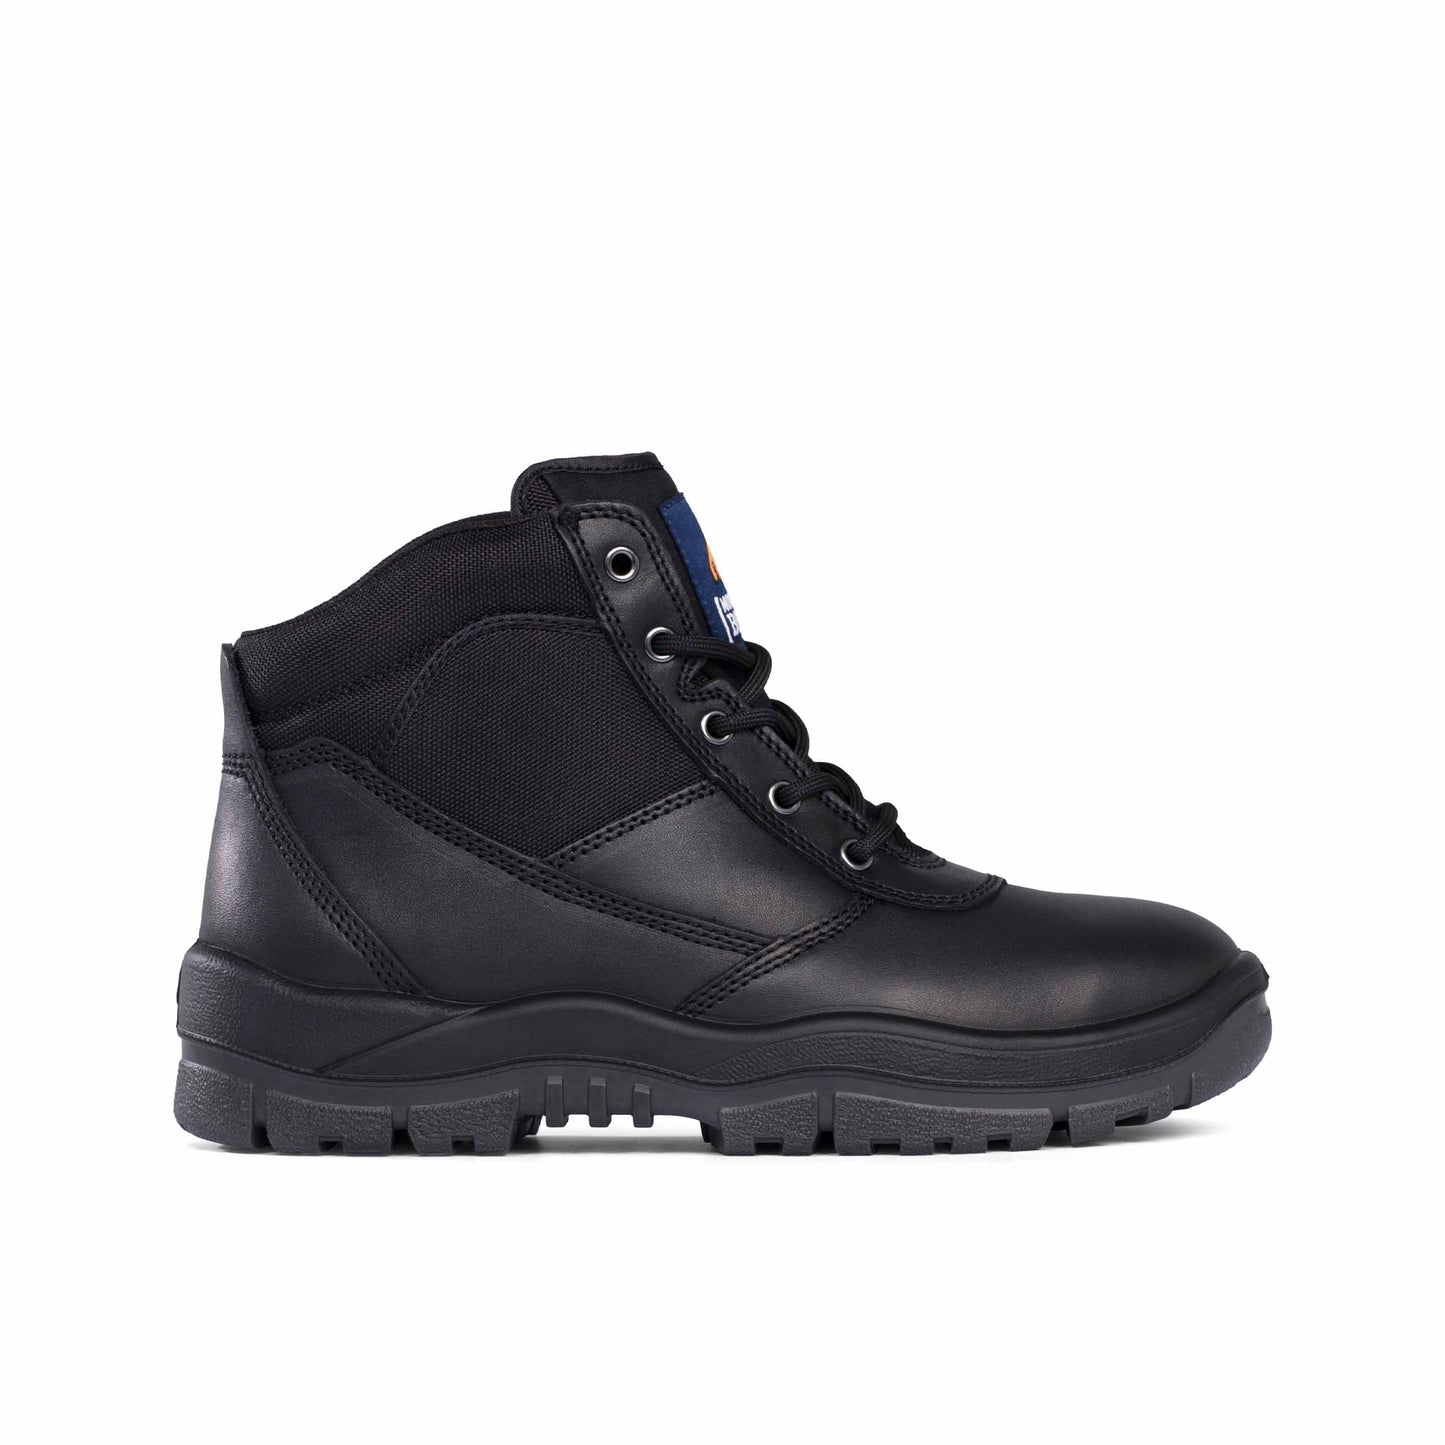 Women's Lace Up Boot with Steel Toe Cap